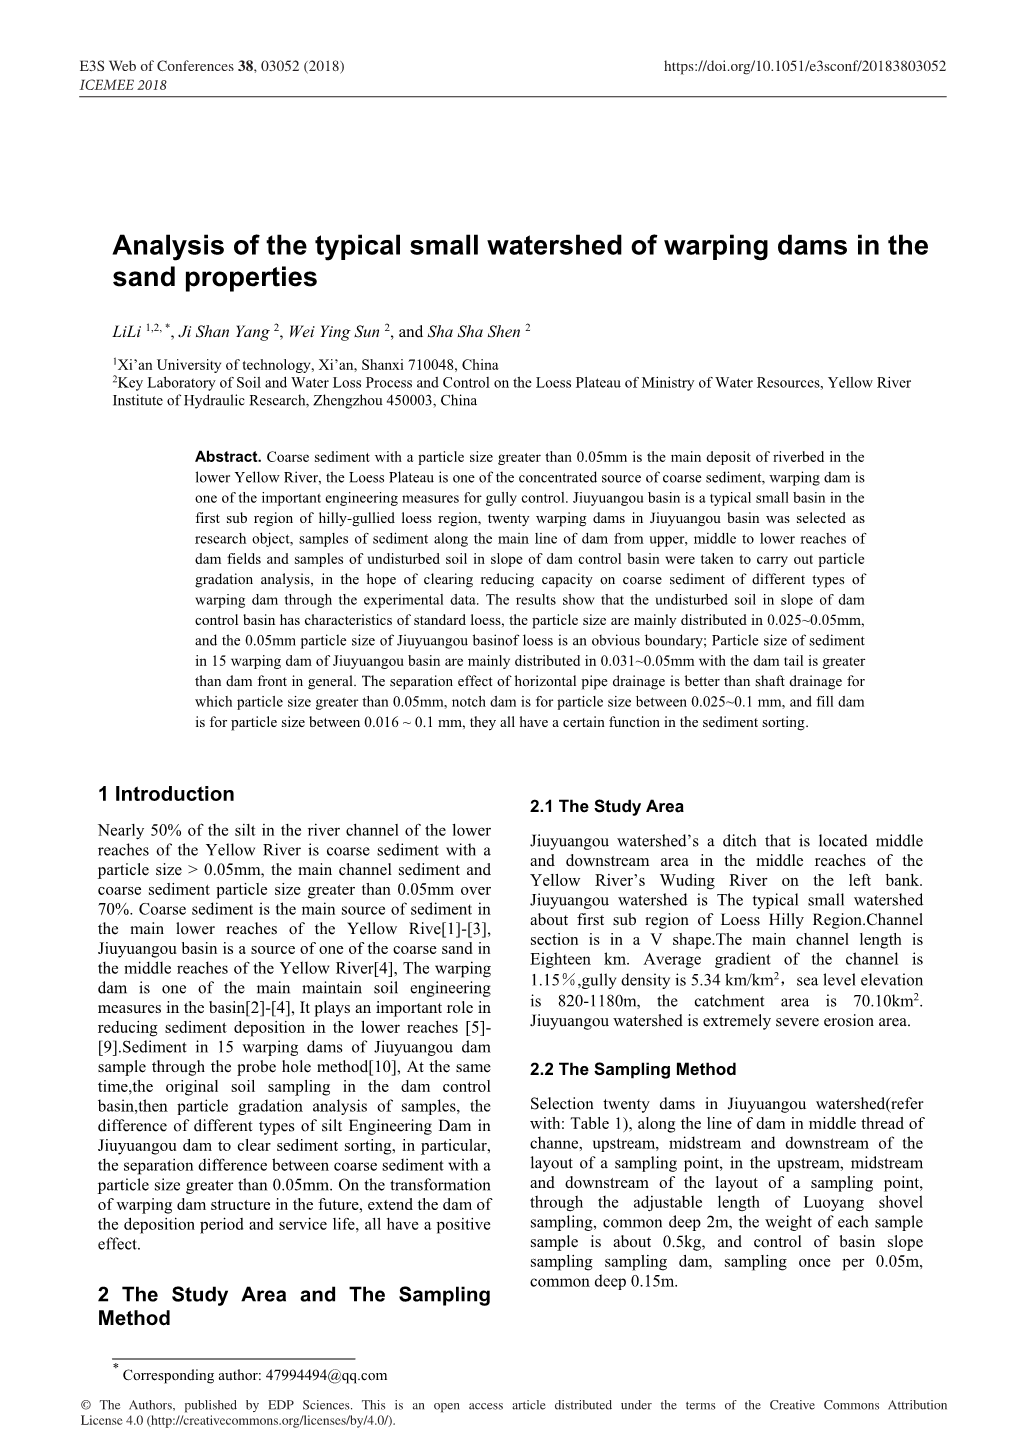 Analysis of the Typical Small Watershed of Warping Dams in the Sand Properties